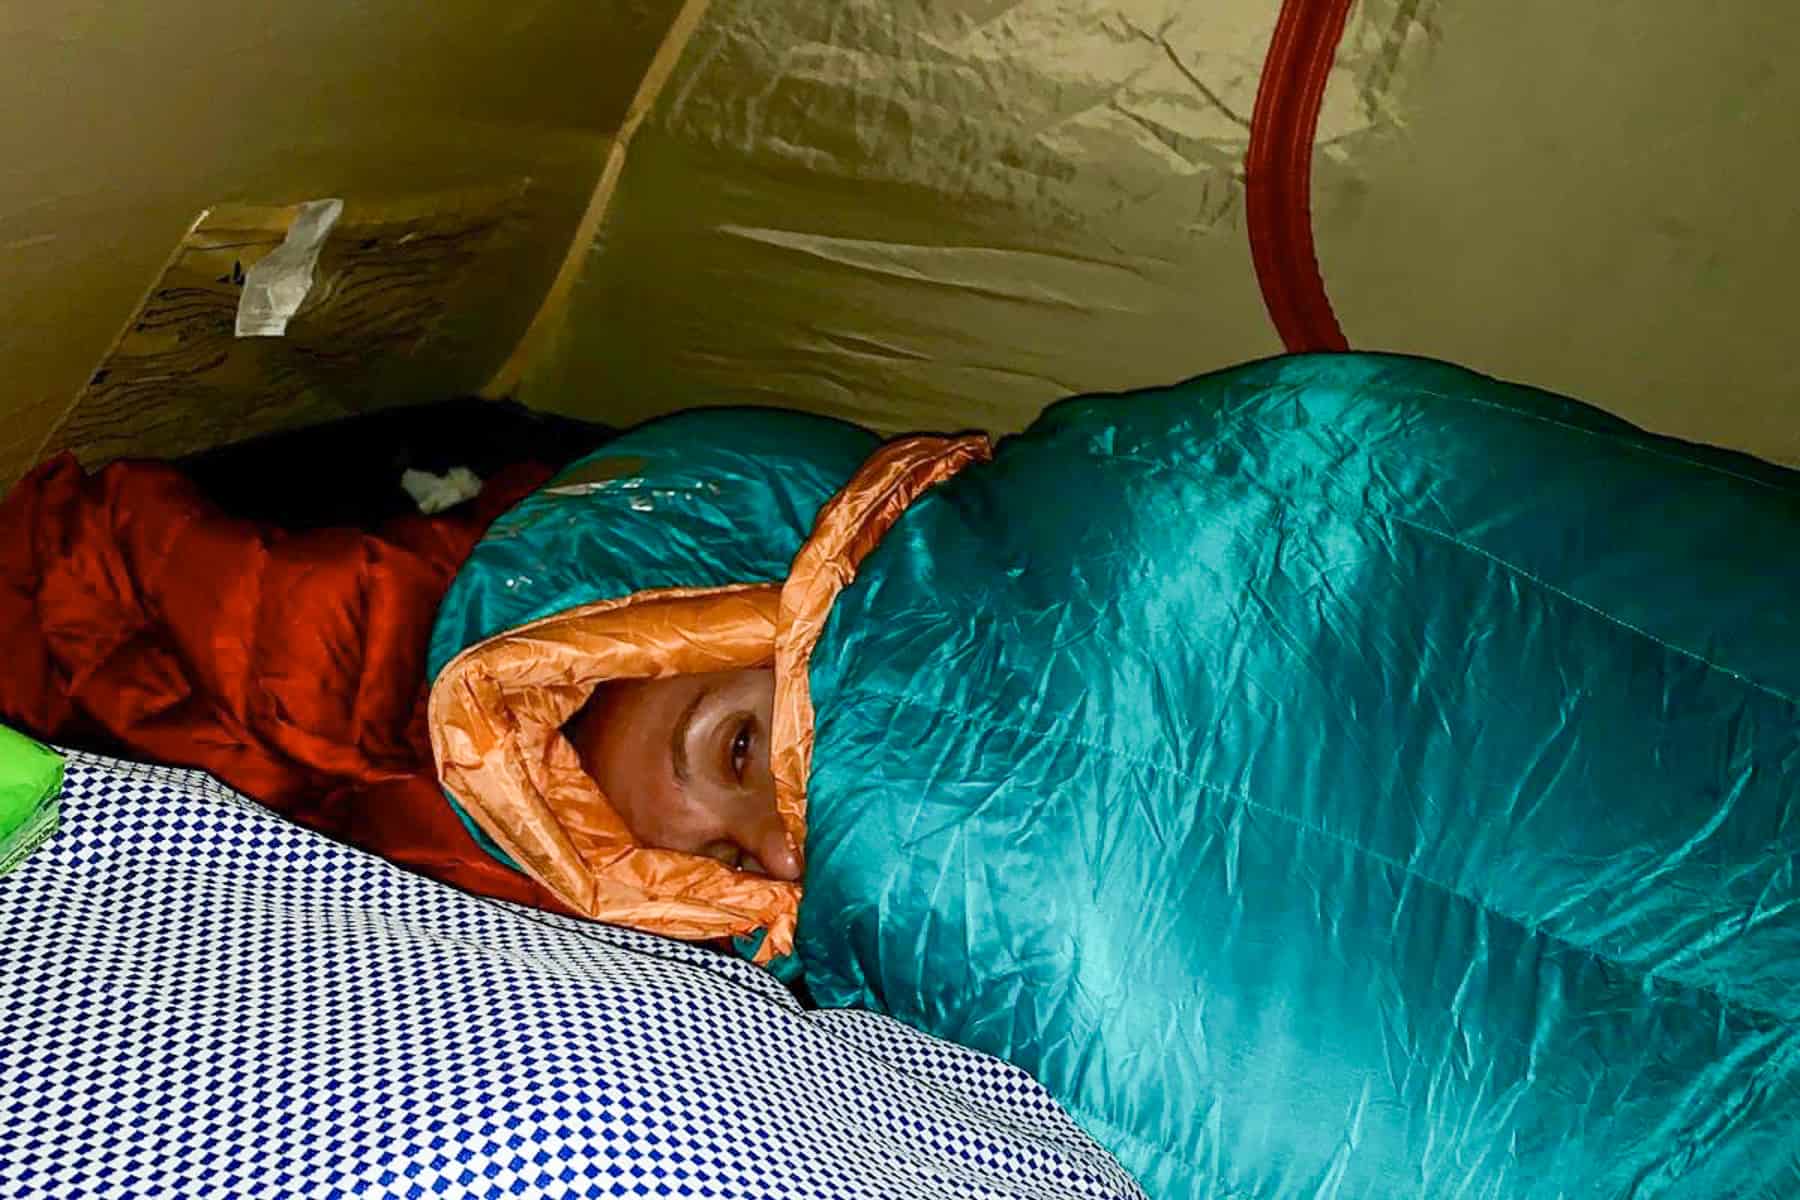 A women lies snug in a mint green and orange sleeping bag in a small tent during a Kilimanjaro trek